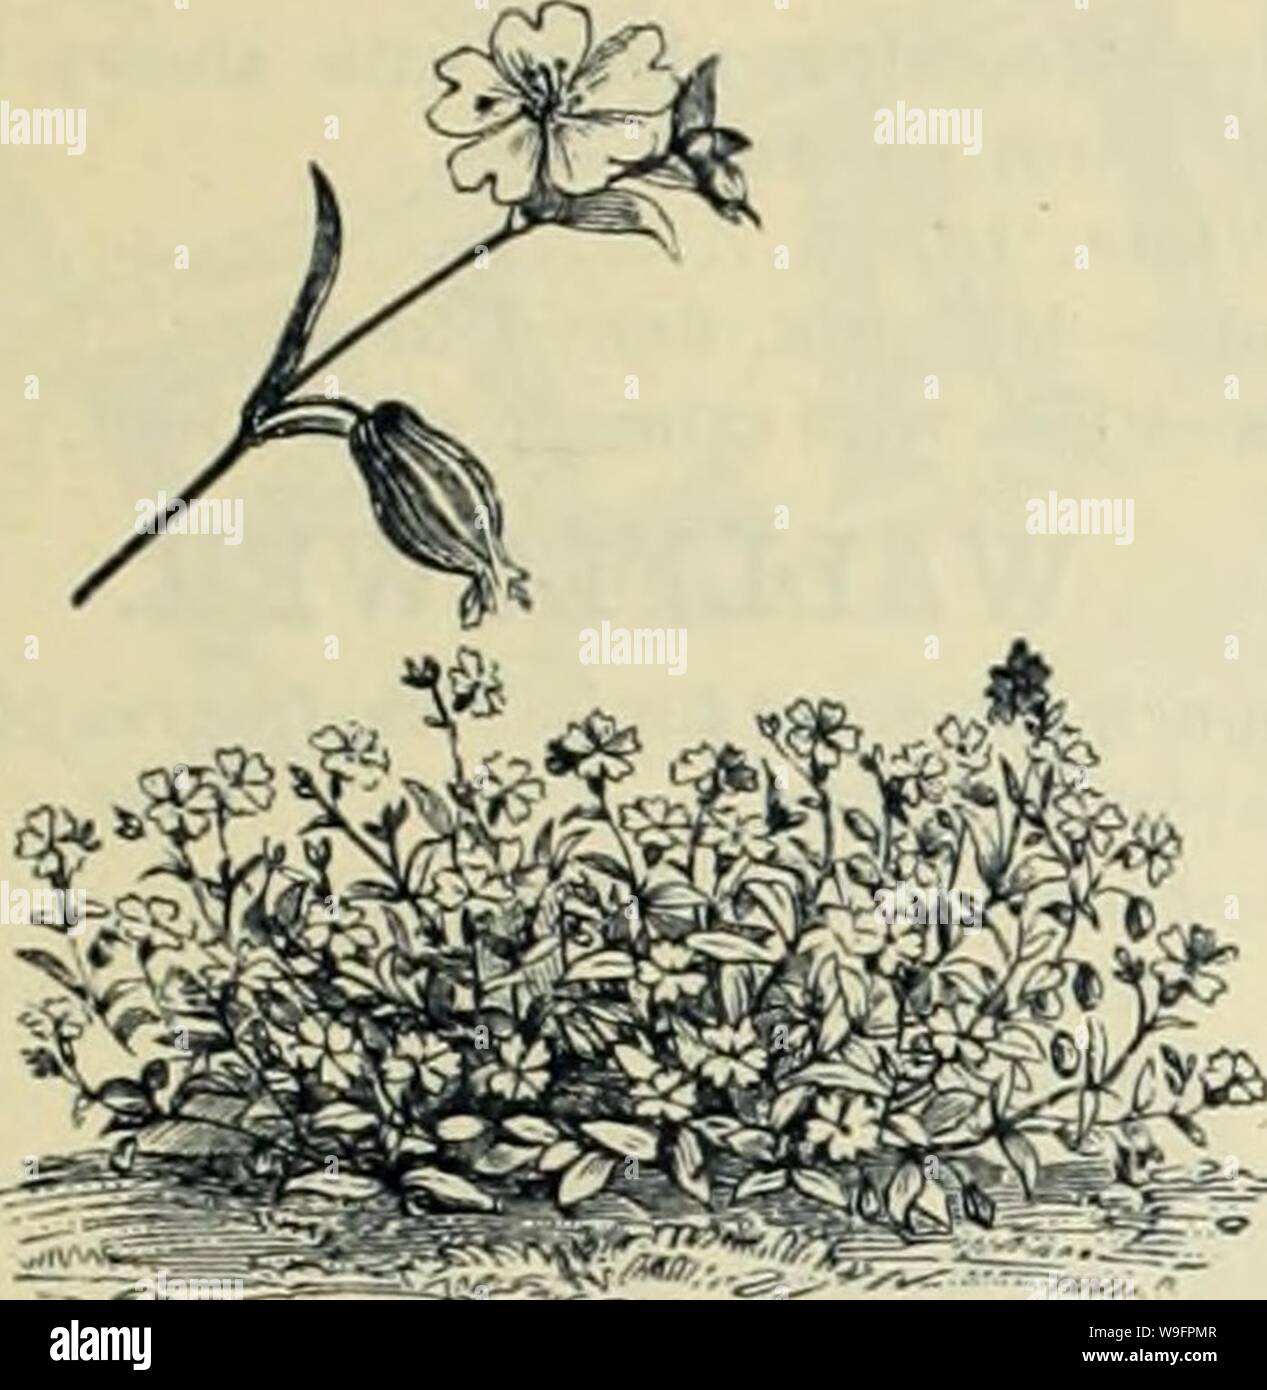 Archive image from page 62 of Currie Bros' horticultural guide . Currie Bros.' horticultural guide : spring 1888  curriebroshortic1888curr Year: 1888 ( 69    SILENE, OR CATCHFLY. Beautiful, free-flowering plants, very attractive for rock work, etc. Pendula Compacta—Mixed, all colore Scarlet, strlpad with White—Per lb., $1.00; per oz., 10 cts 5 Vesuvius- Rose and violet spotted 10 Violet Queen—A charming variety, rang- ing from deep manve to light violet; per lb., $1.60; per oz., 15 cts 5 White—Per lb , SI.00; peroz., 10 cts 5 Mixed—All colors; per lb., 75 cts.; per oz., 10 cts 5 The two follow Stock Photo